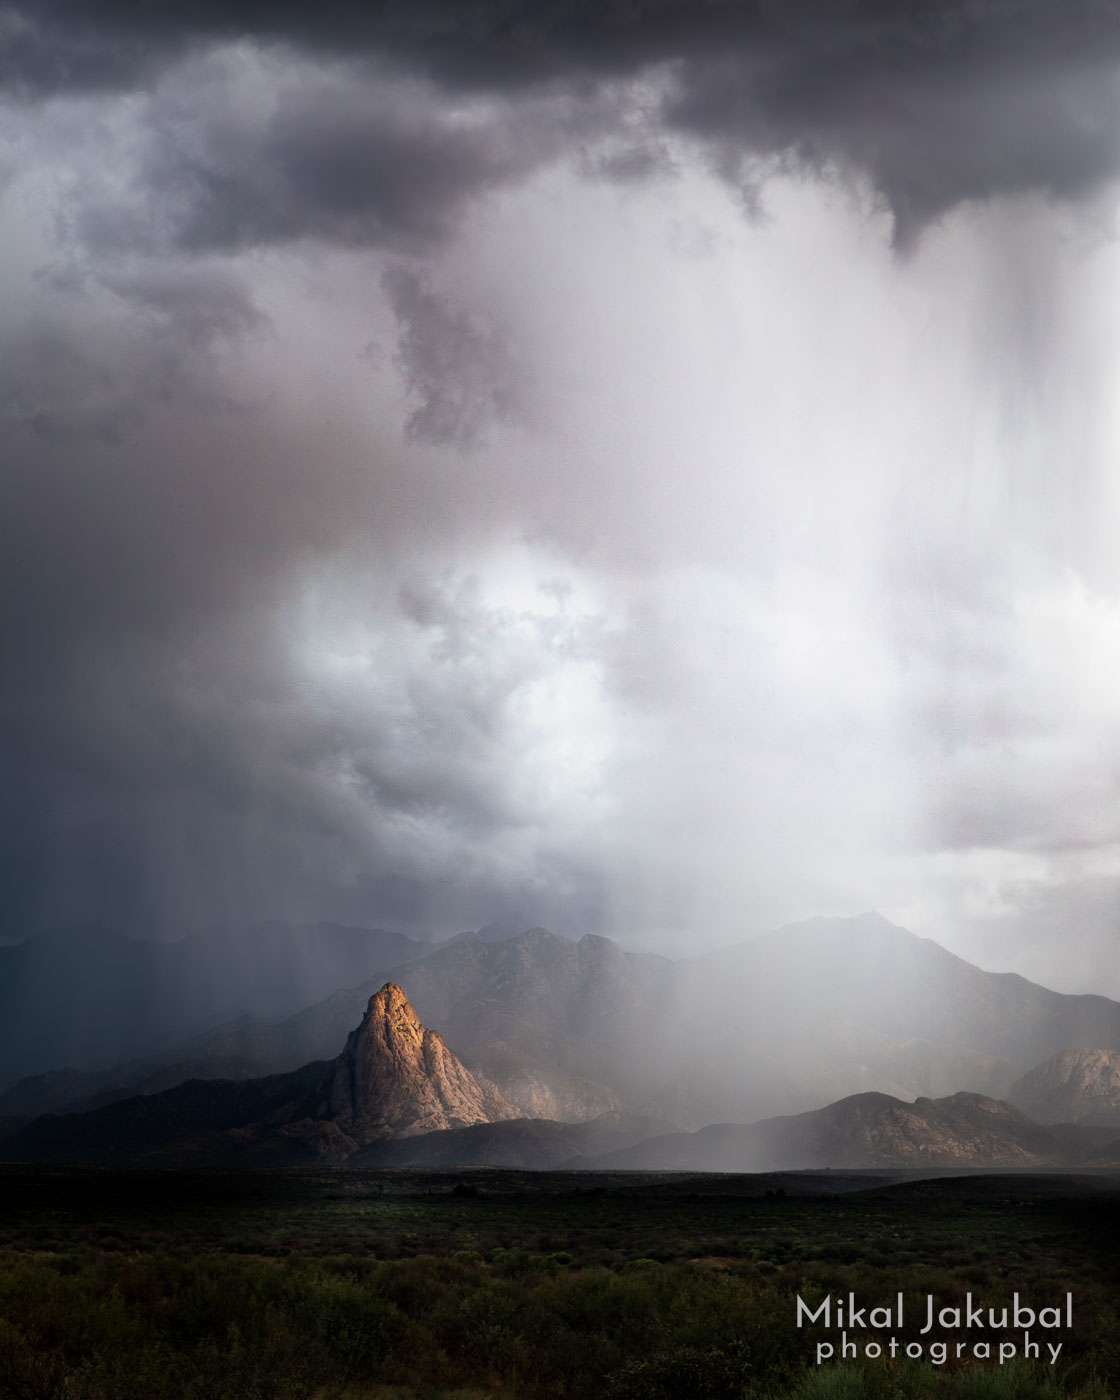 A stormy day, with rain falling from high, dark clouds. Rain shrouded mountains lie behind the clouds, but in the foothills a rock outcrop is illuminated by sunlight through a cloud break.